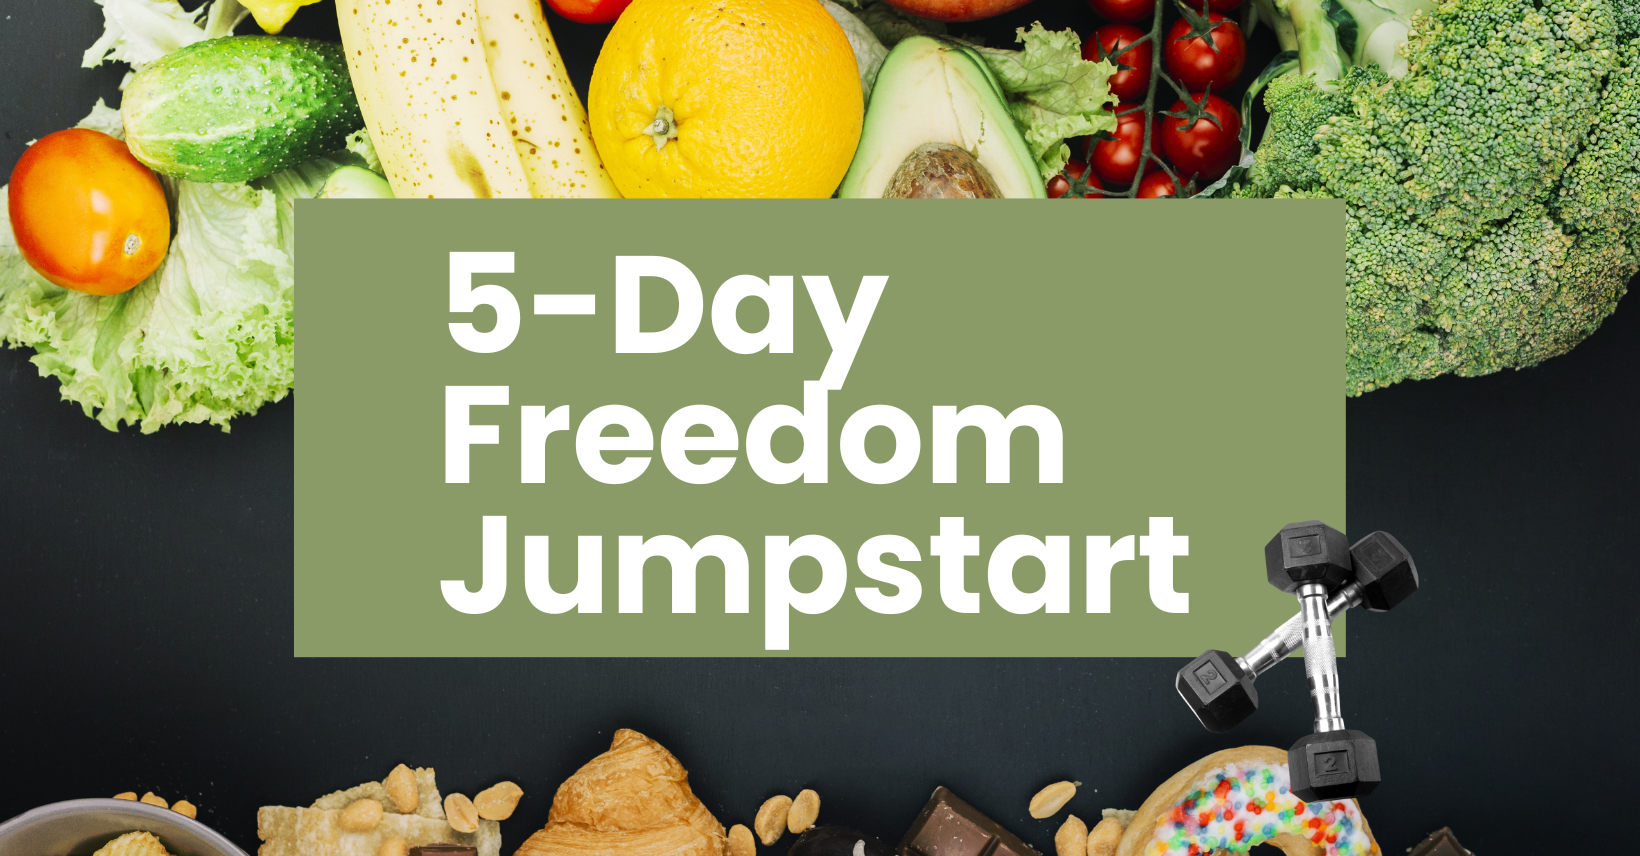 5-Day Freedom Jumpstart Cover<br />
